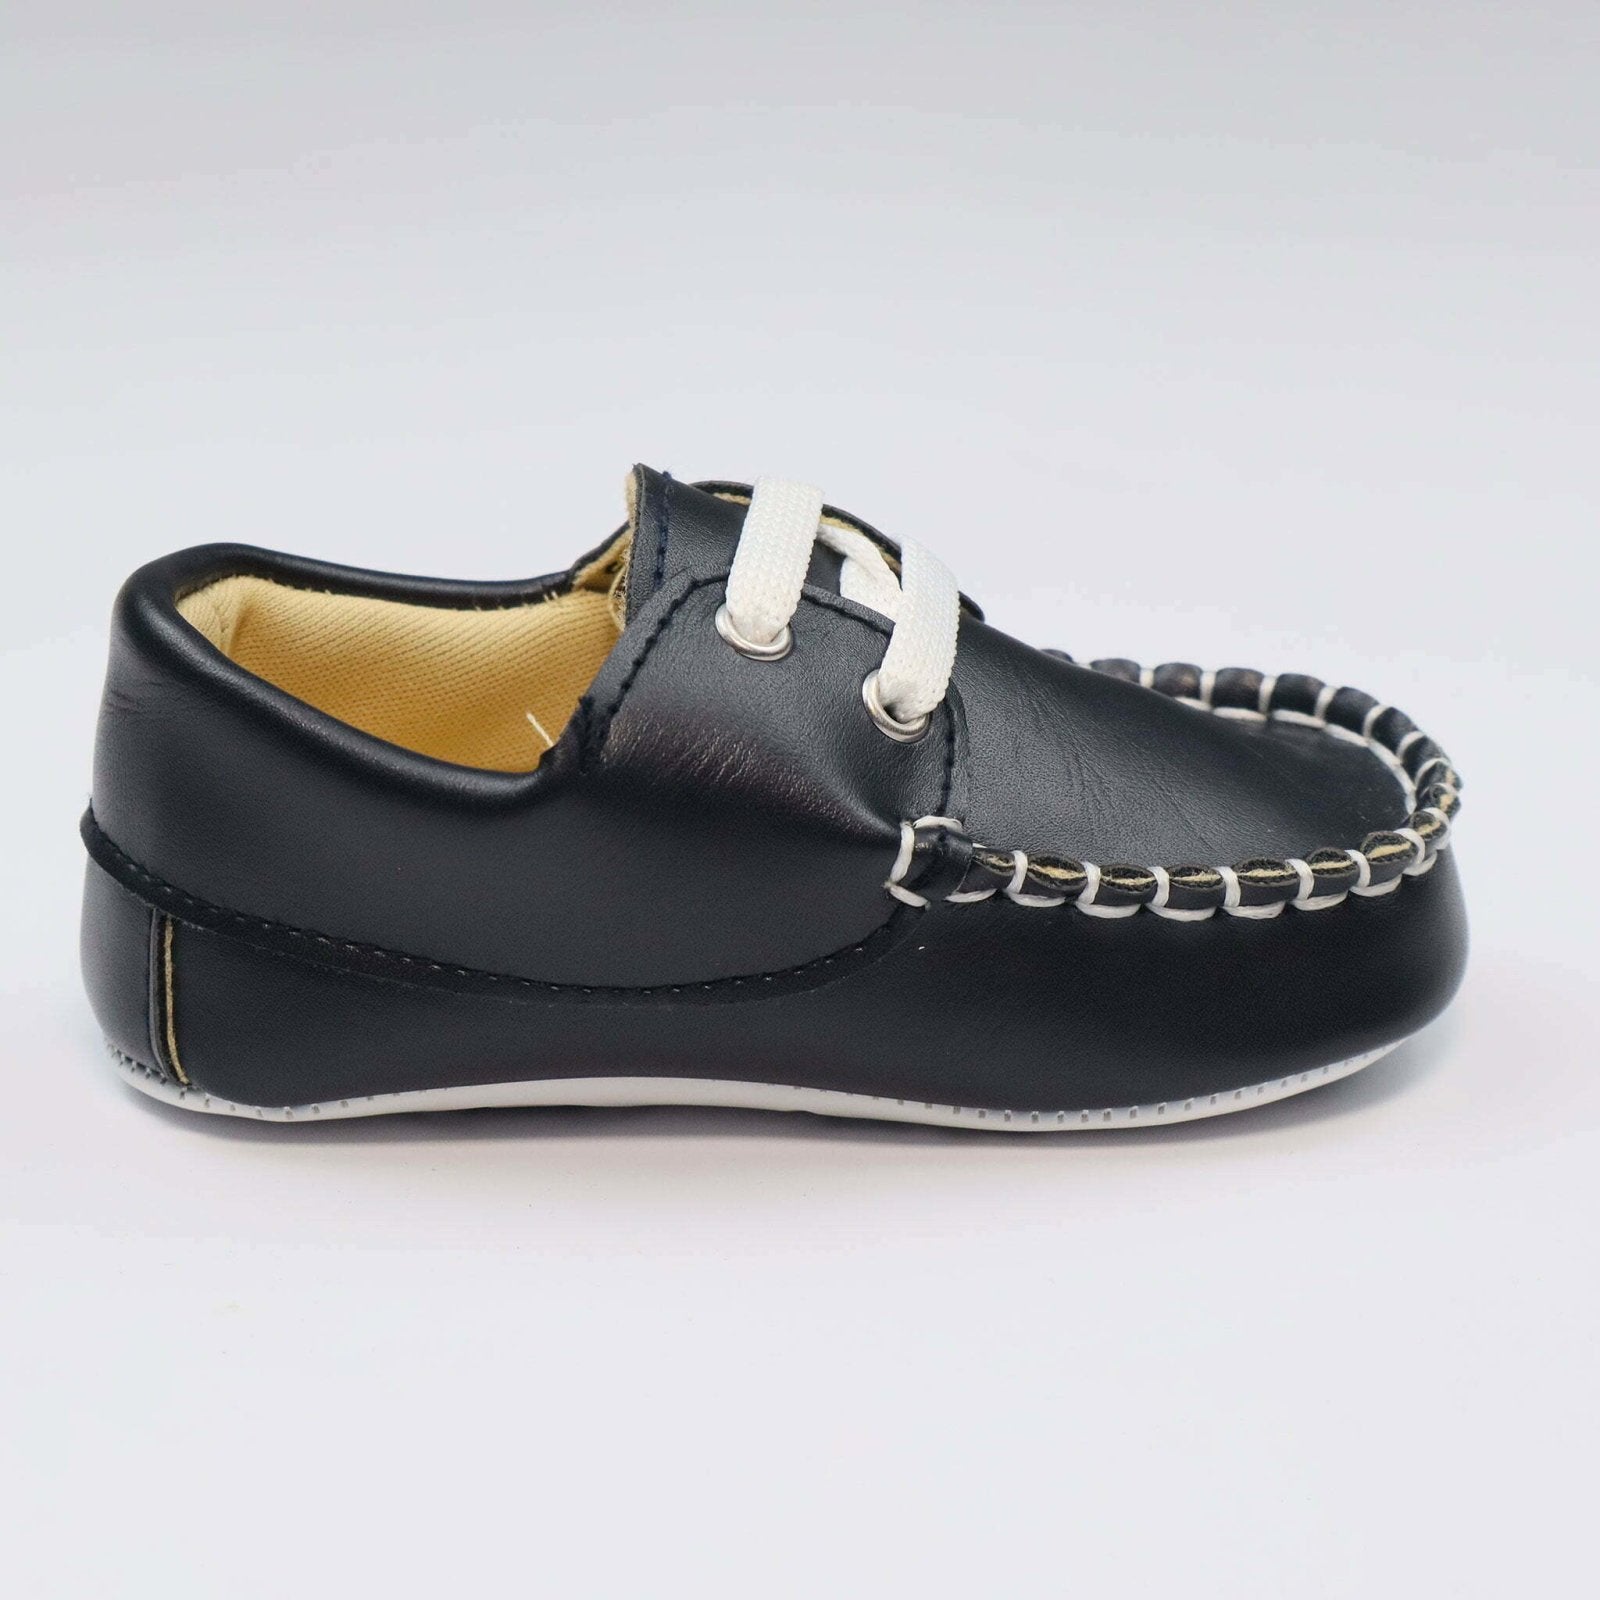 Baby Shoes Black Color With White Laces by Baby Pattini